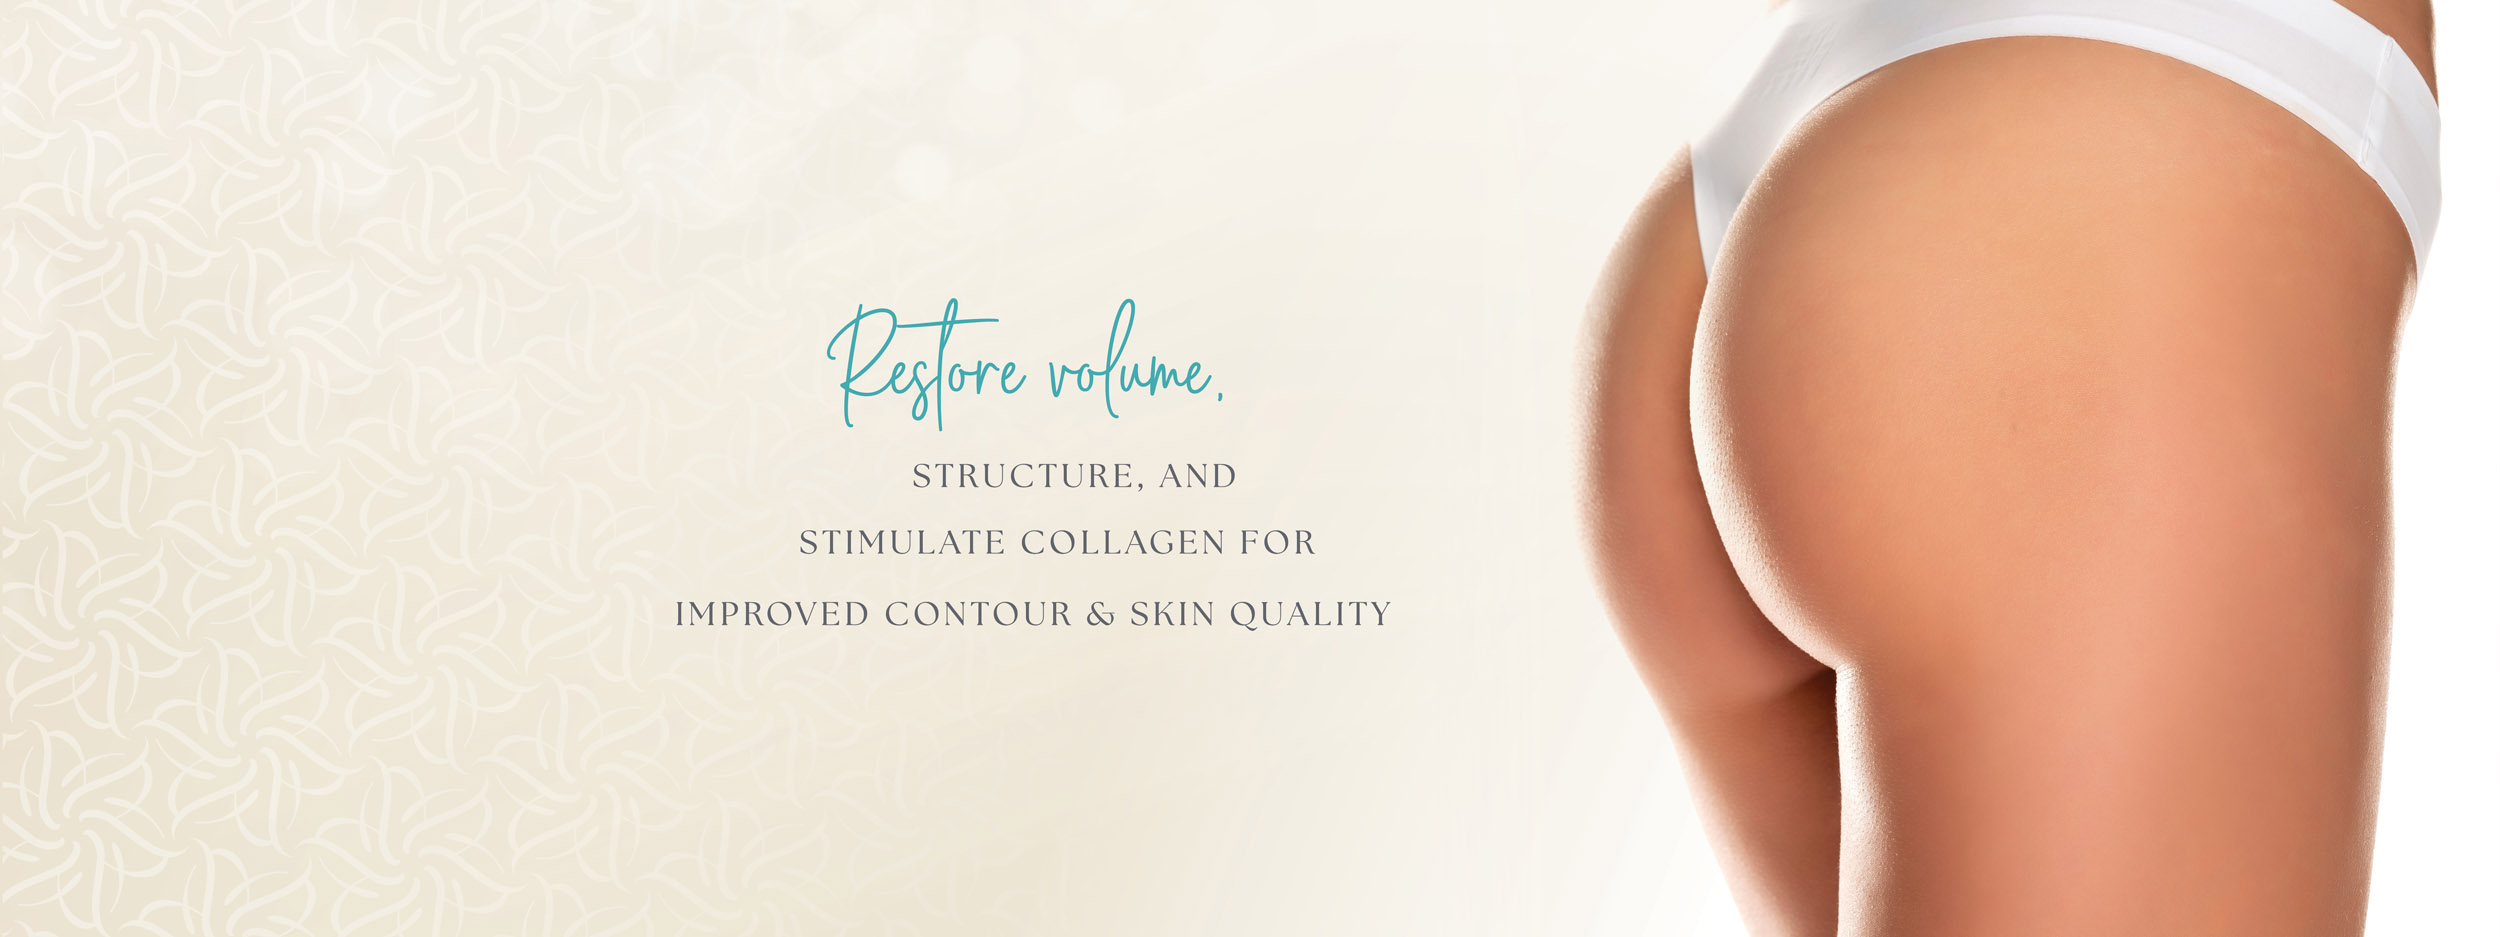 Contoured and firm buttocks from Sculptra services at Refresh Aesthetic Center in Whitefish Bay WI